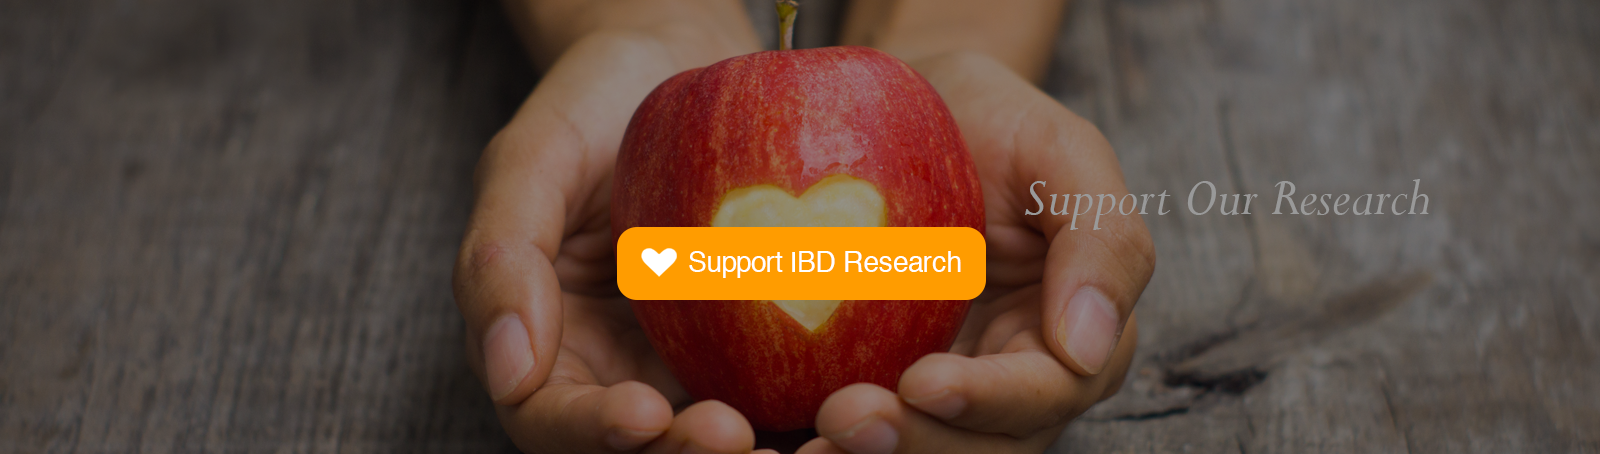 Support IBD Research